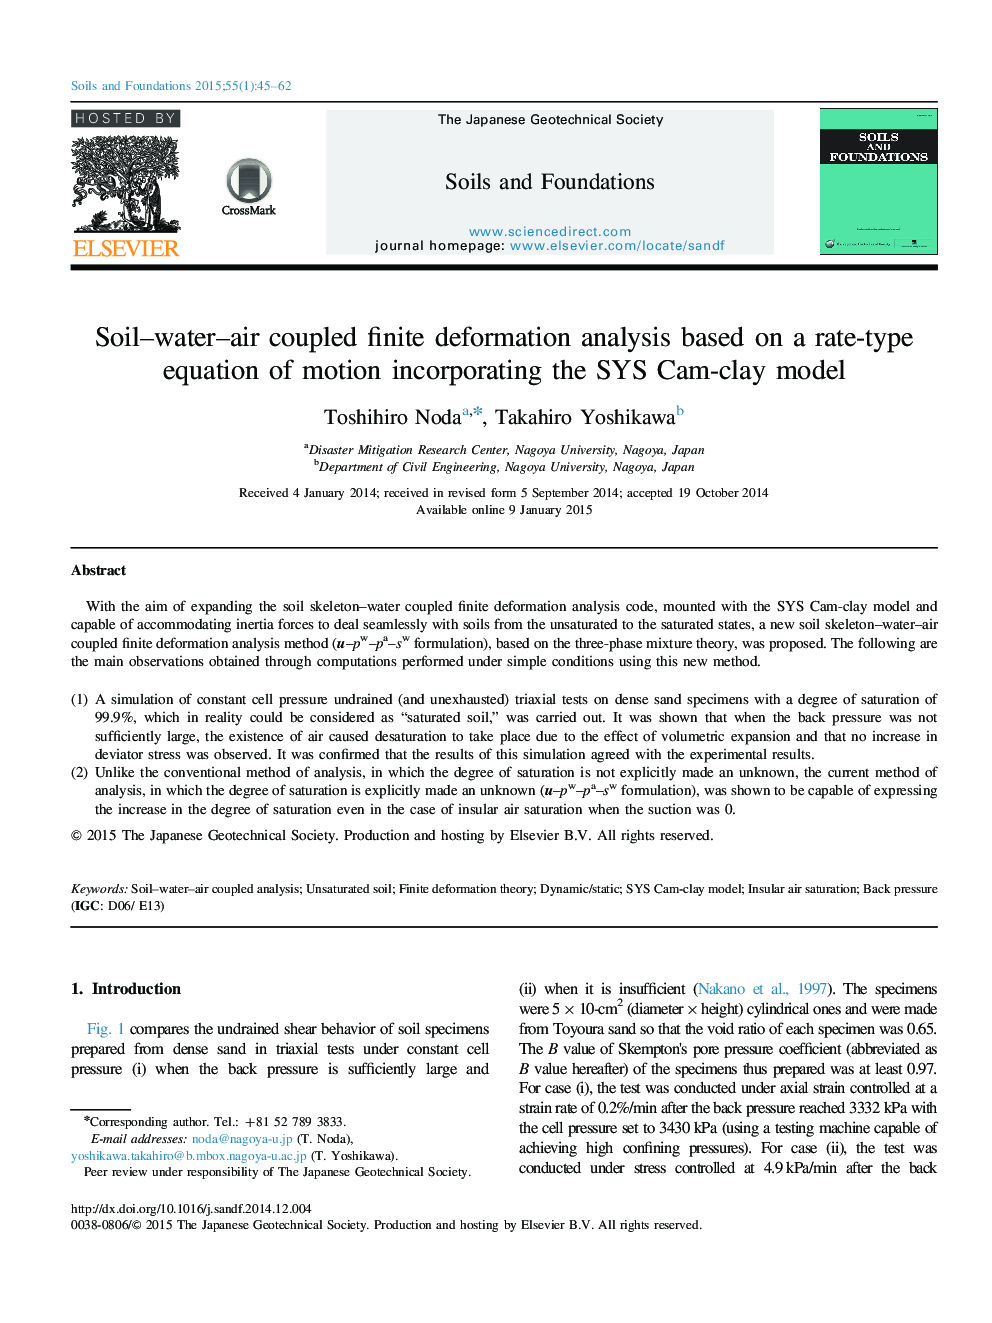 Soil–water–air coupled finite deformation analysis based on a rate-type equation of motion incorporating the SYS Cam-clay model 